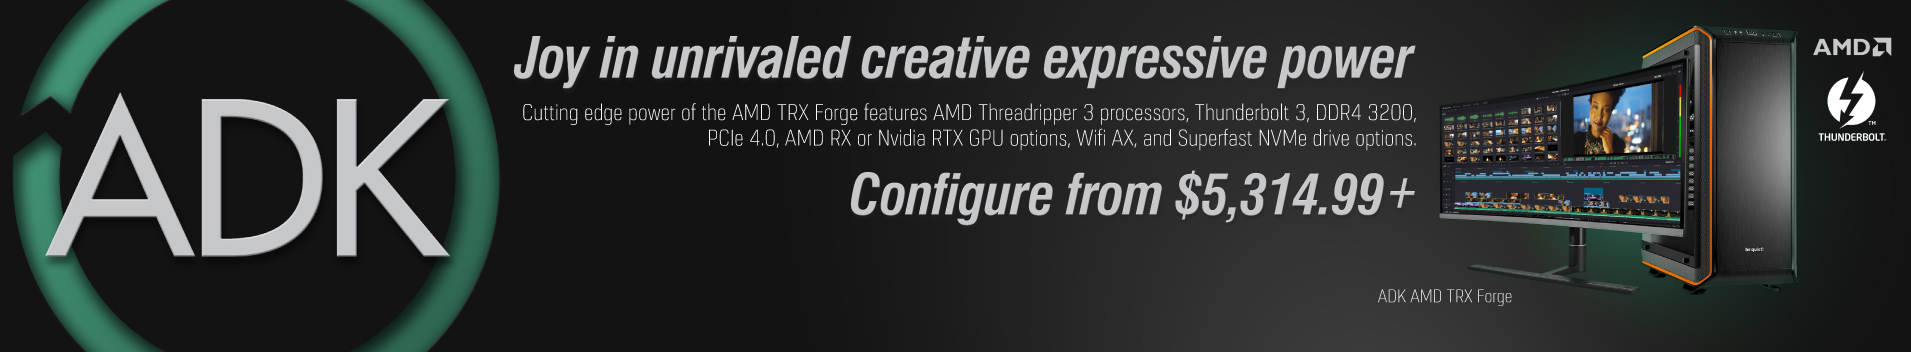 AMD TRX Forge features AMD Threadripper 3 processors, Thunderbolt 3, DDR4 3200, PCIe 4.0, AMD RX or Nvidia RTX GPU options, Wifi AX, and Superfast NVMe drive options